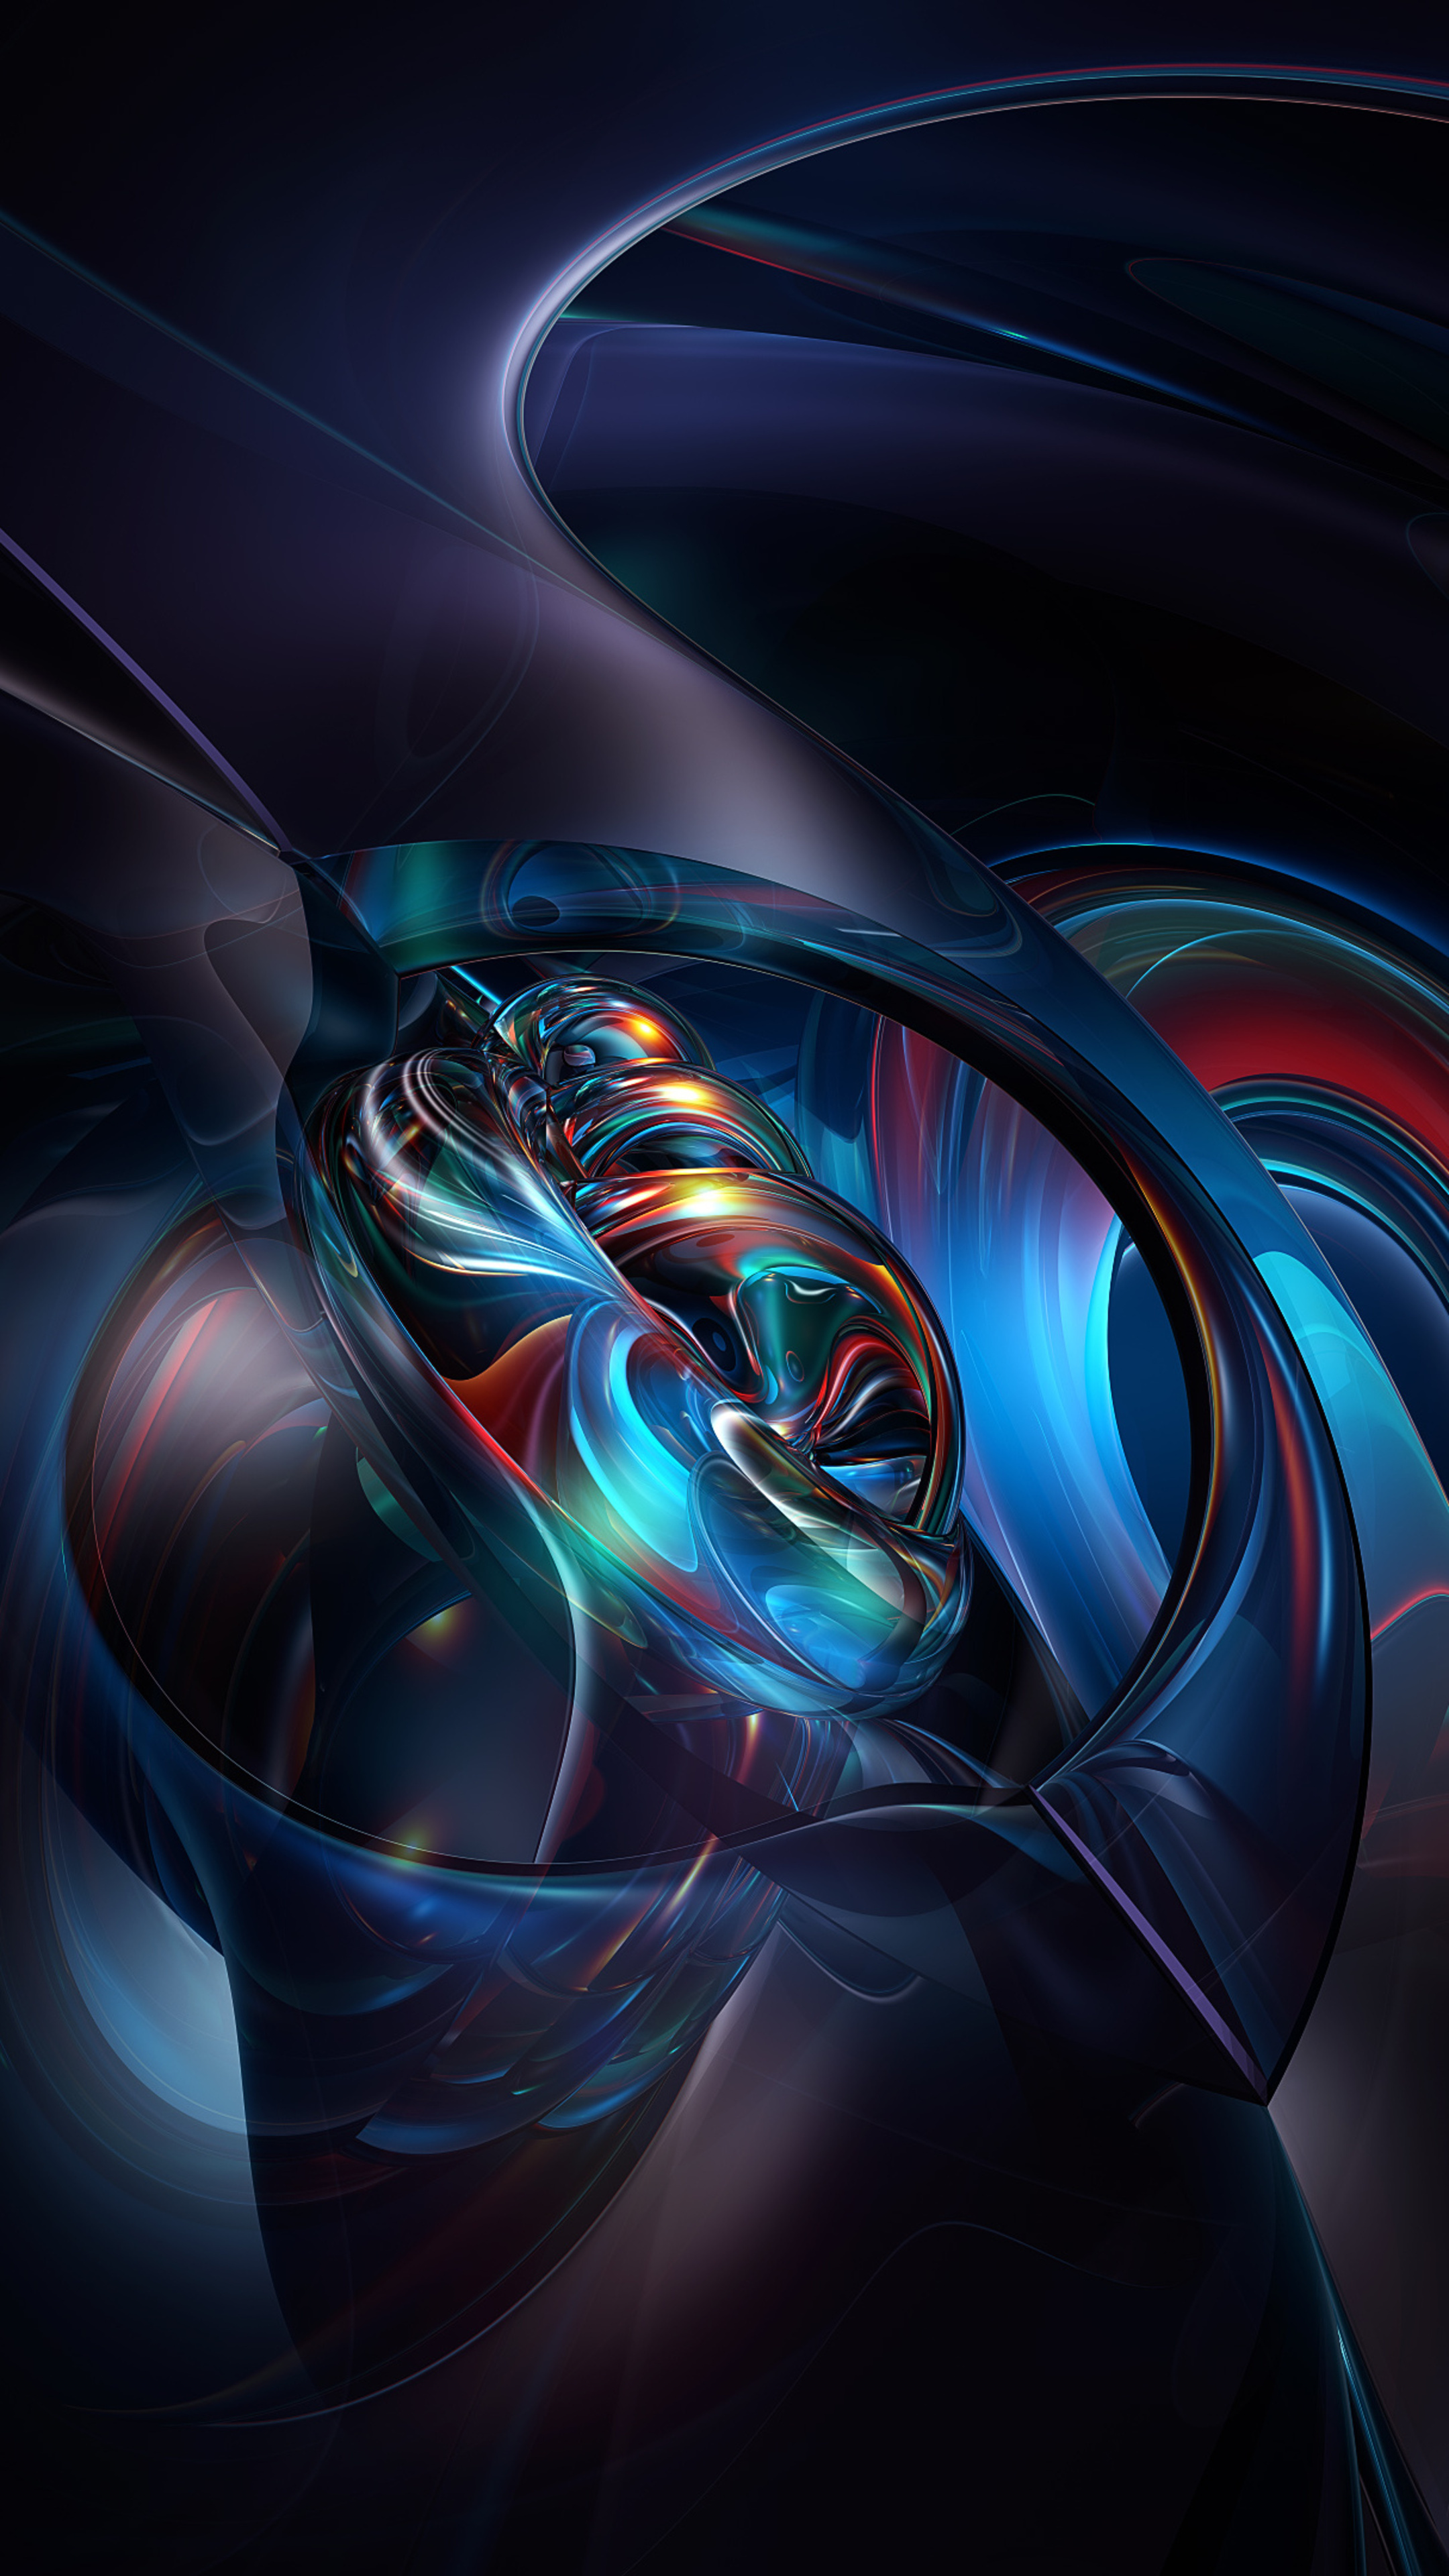 Graphic: A visual representation of an idea, Abstract elements, Flowing shapes. 2160x3840 4K Background.